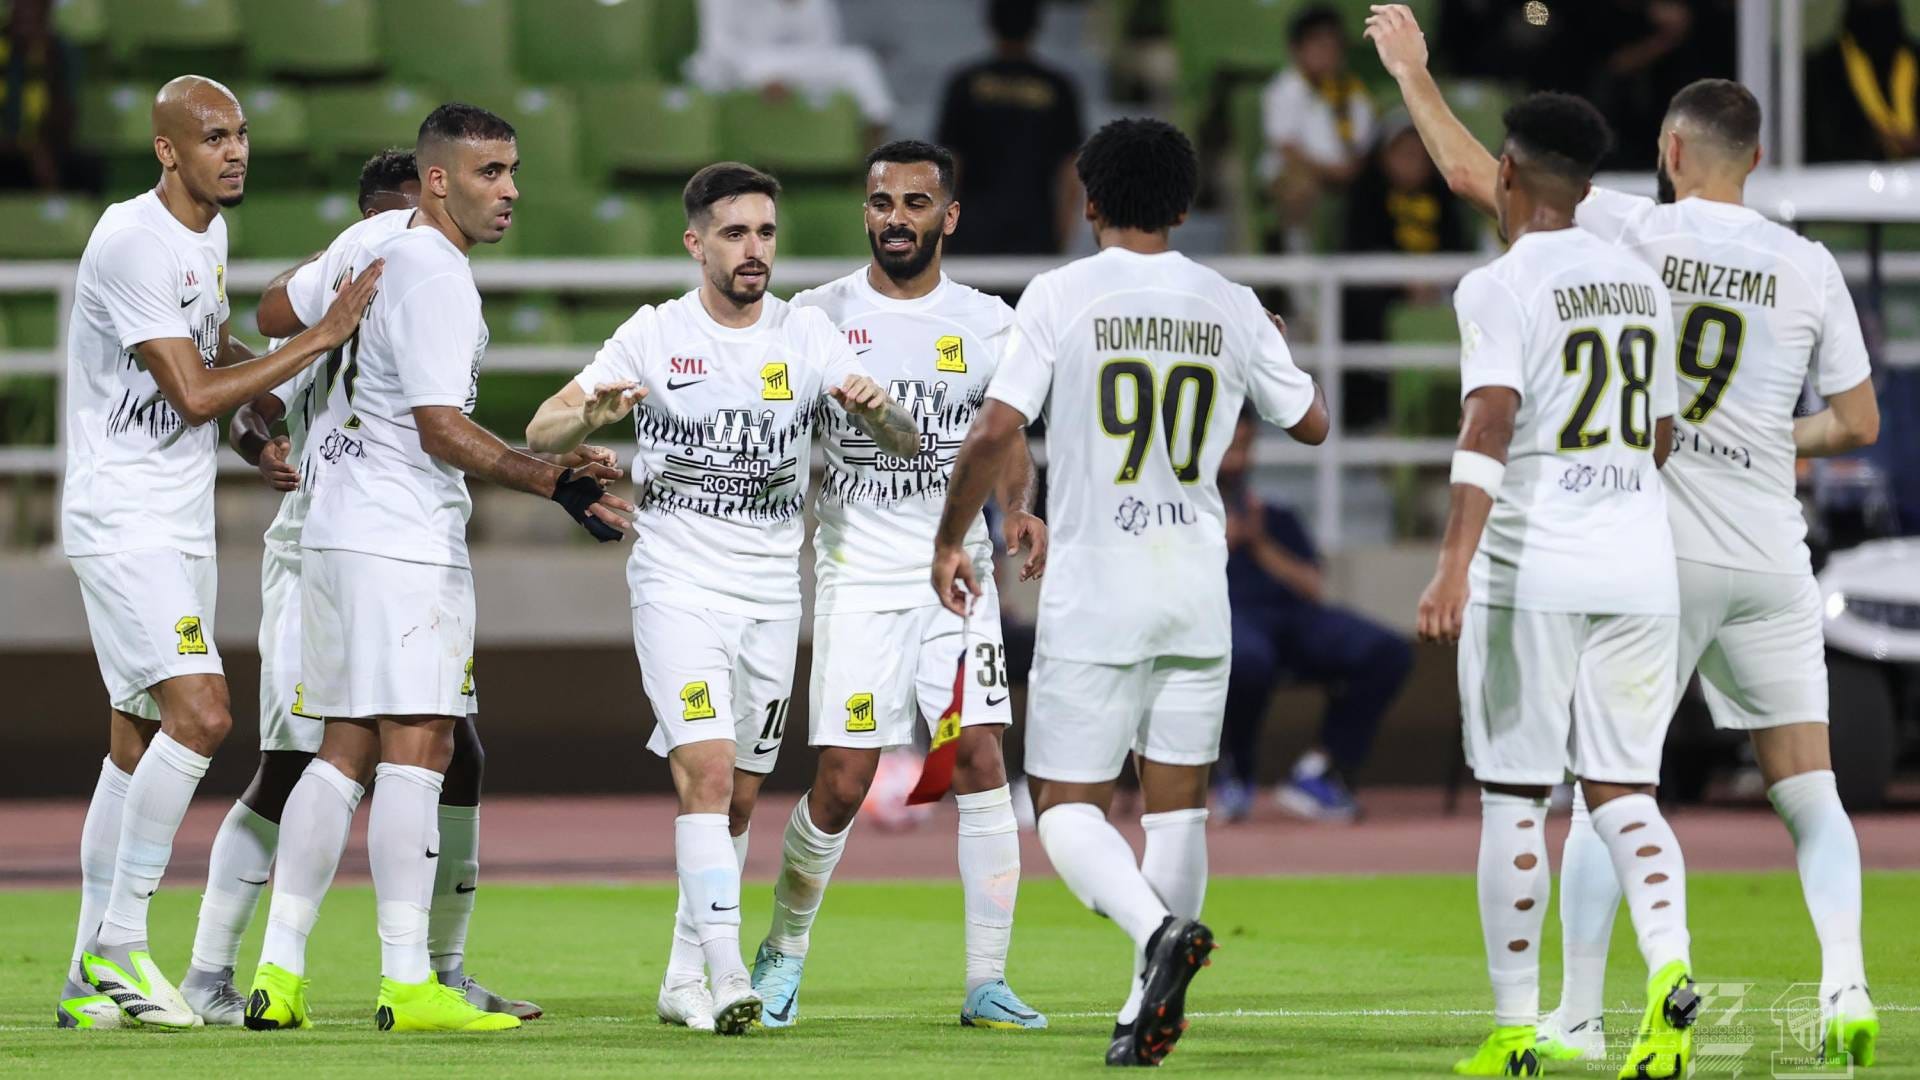 Ittihad vs Tai Where to watch the match online, live stream, TV channels, and kick-off time Goal US